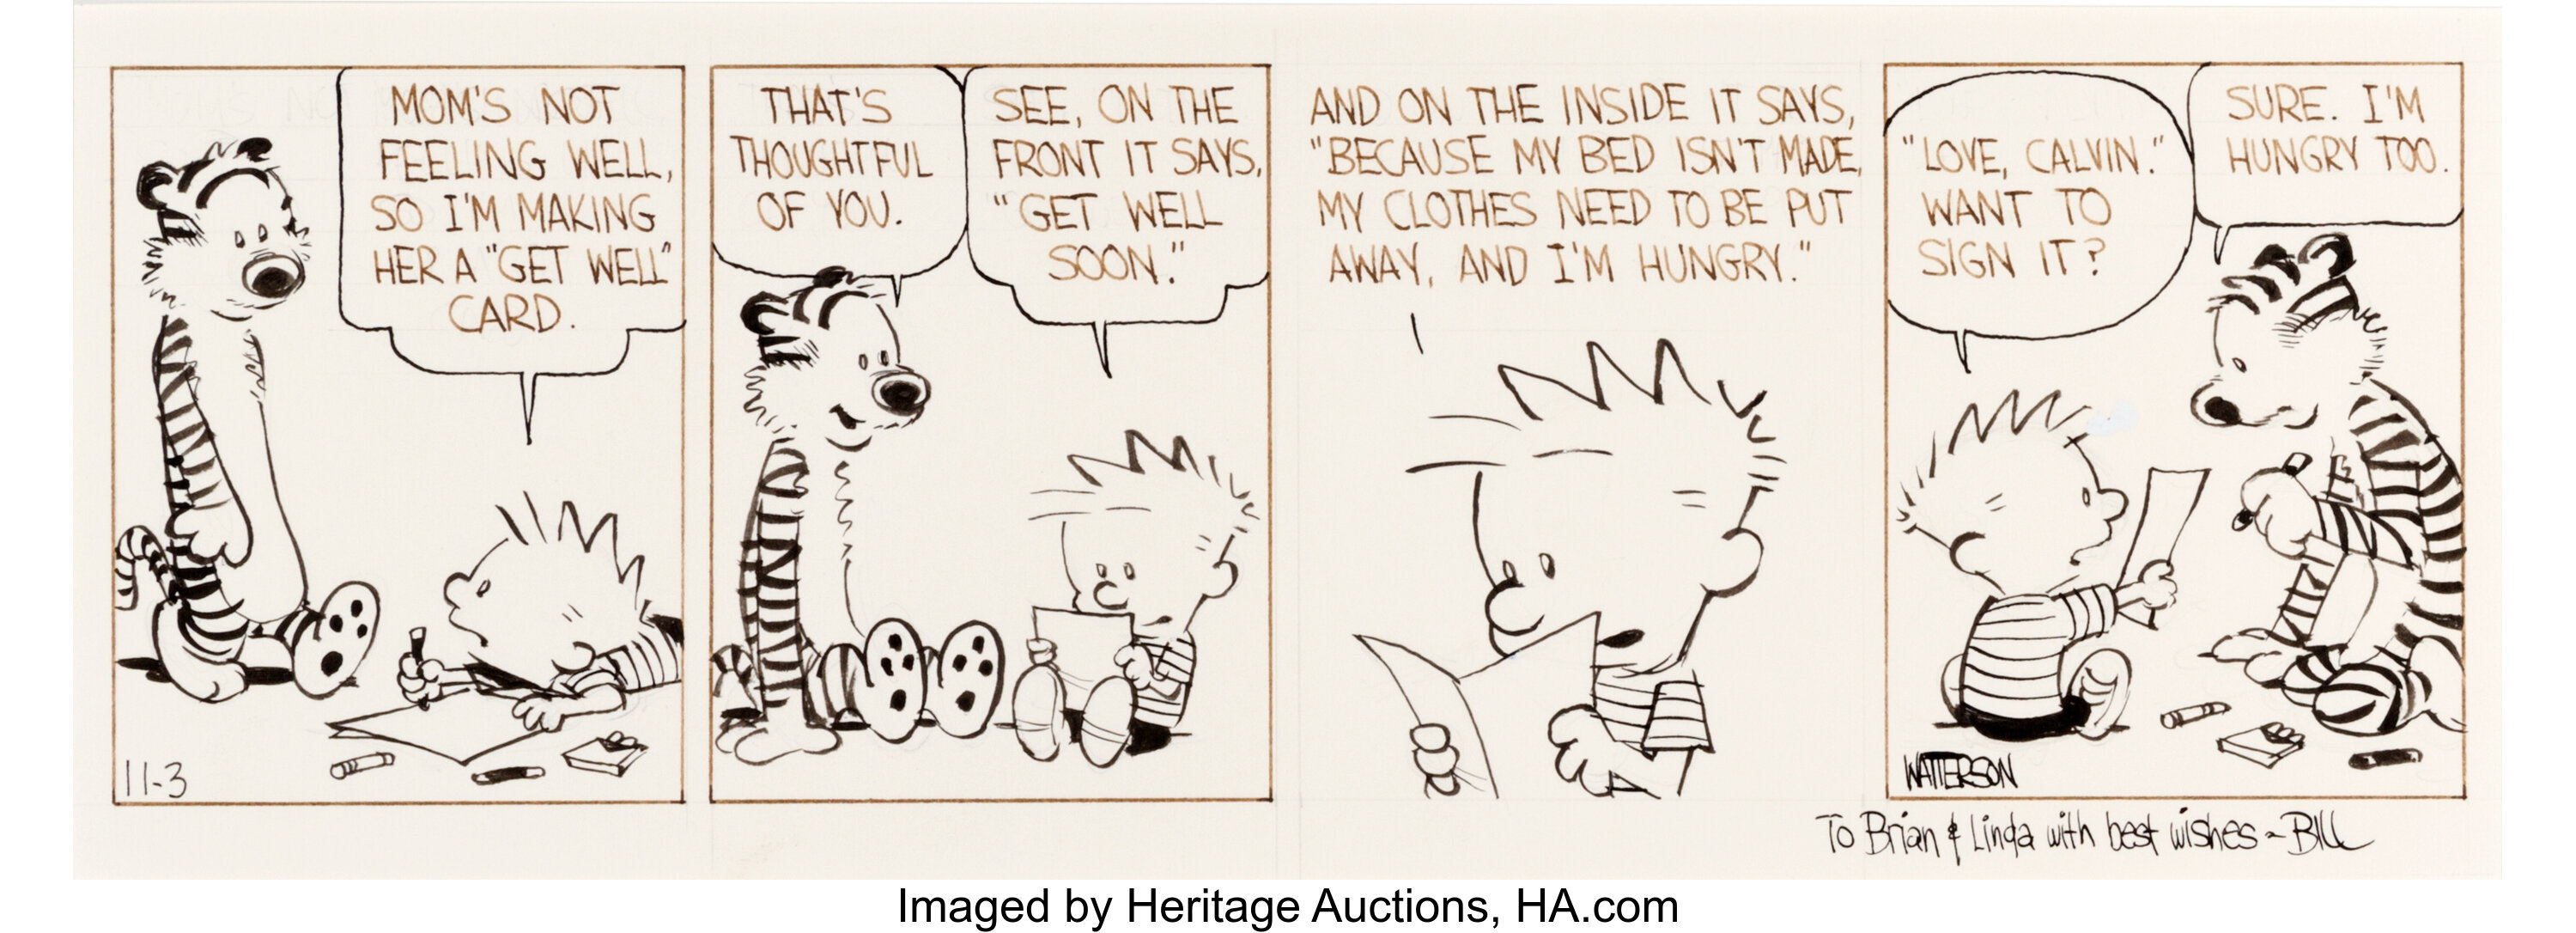 Bill Watterson Calvin and Hobbes Daily Comic Strip Original Art | Lot  #92313 | Heritage Auctions